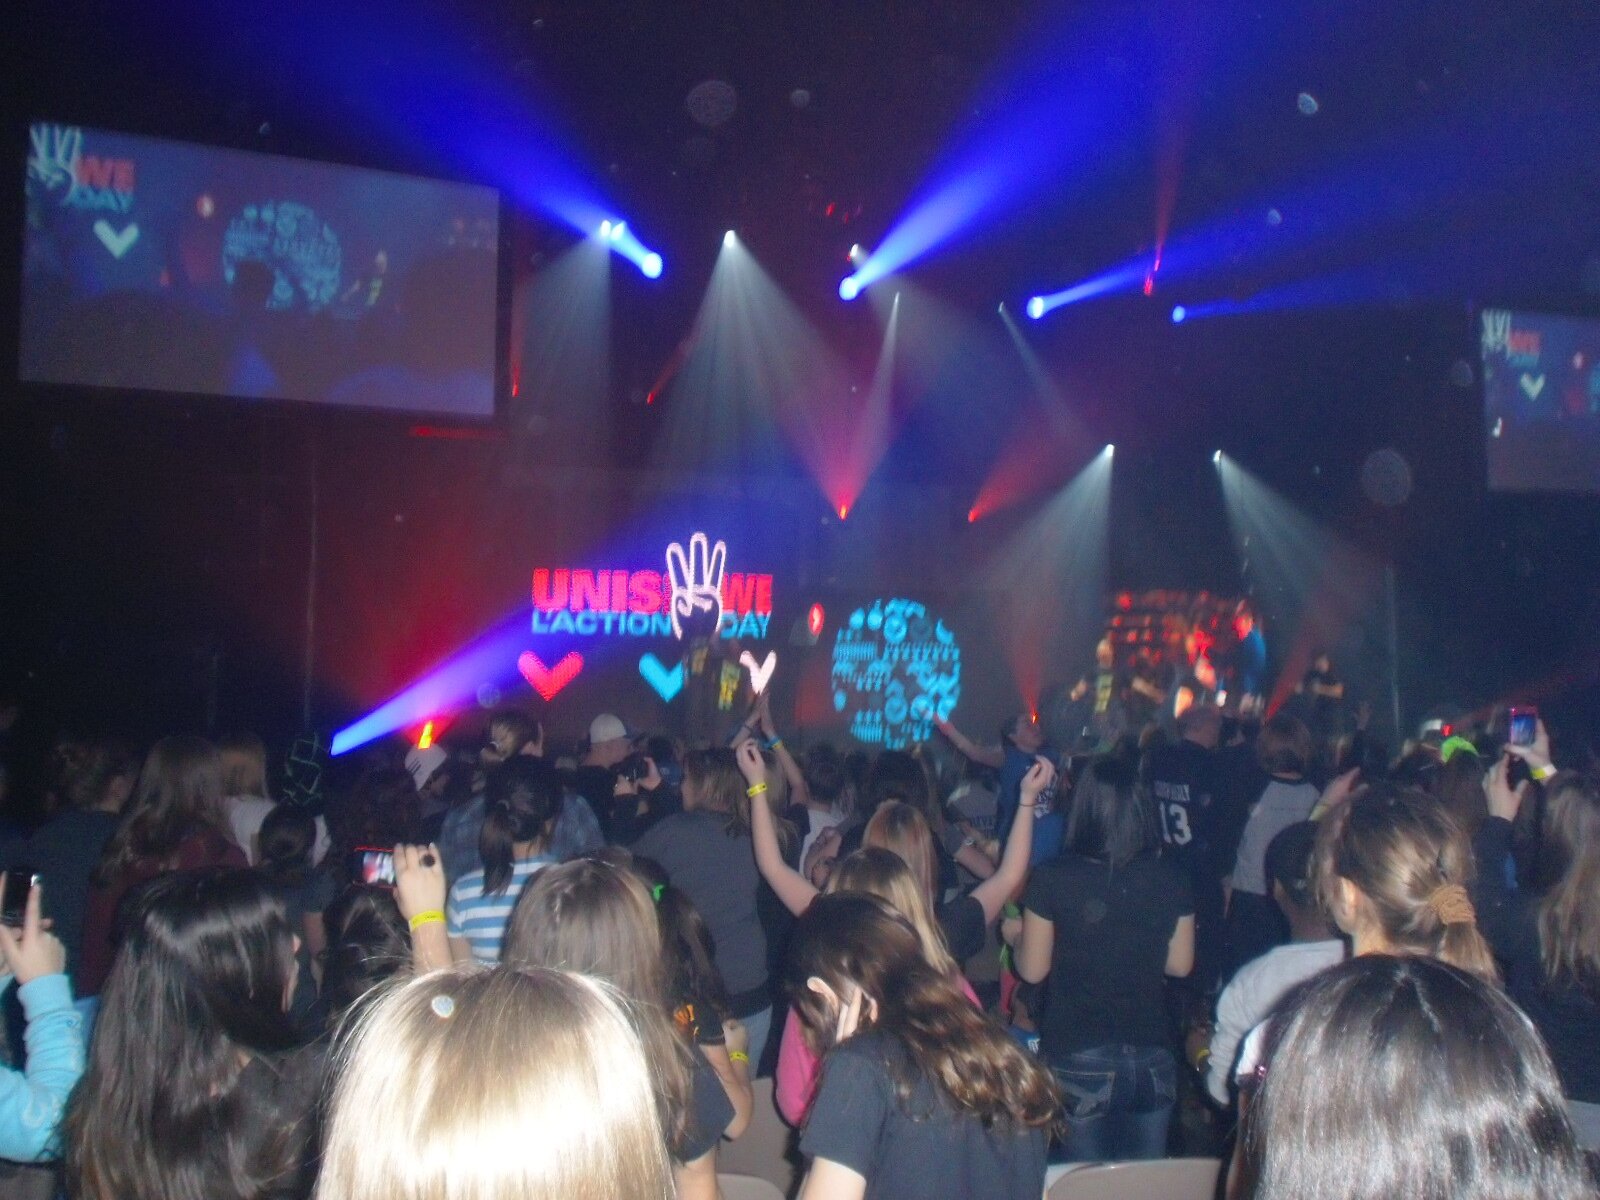 WE Day event - Theatre St. Denis in Montreal